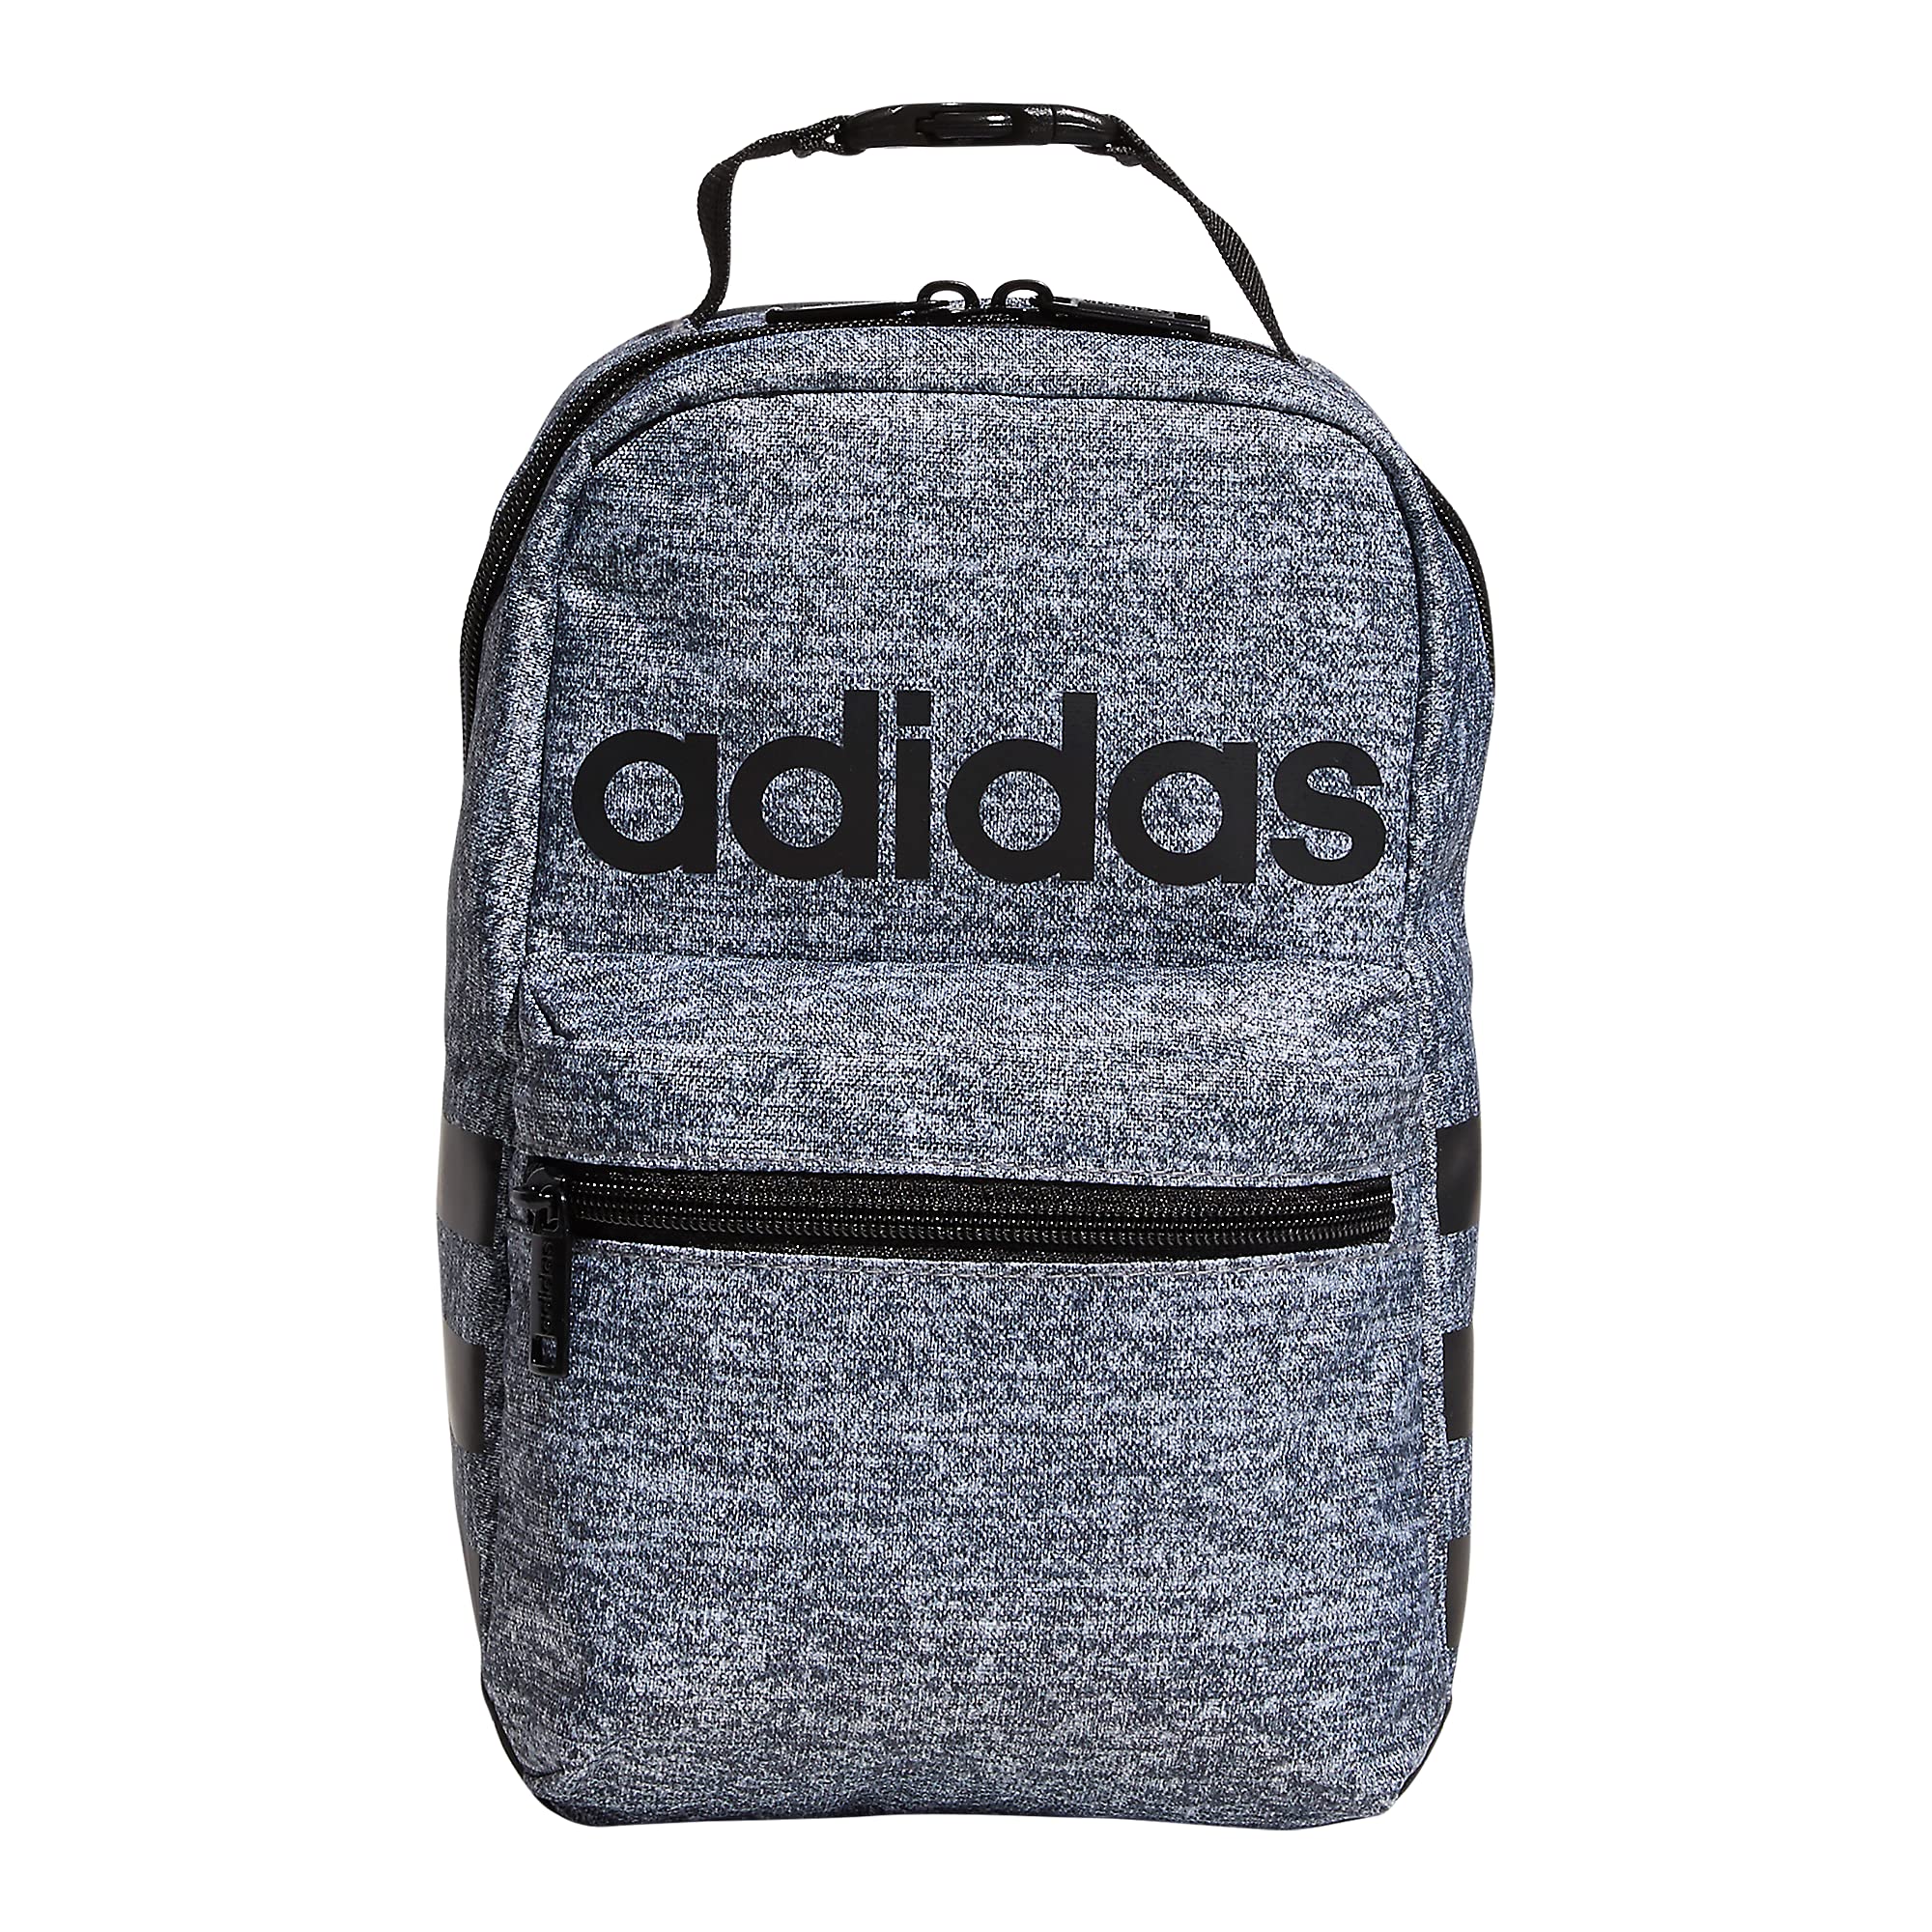 adidas Unisex-Adult Santiago 2 Insulated Lunch Bag Jersey Onix Grey/Black One Size, List Price is $28, Now Only $15.4, You Save $12.6